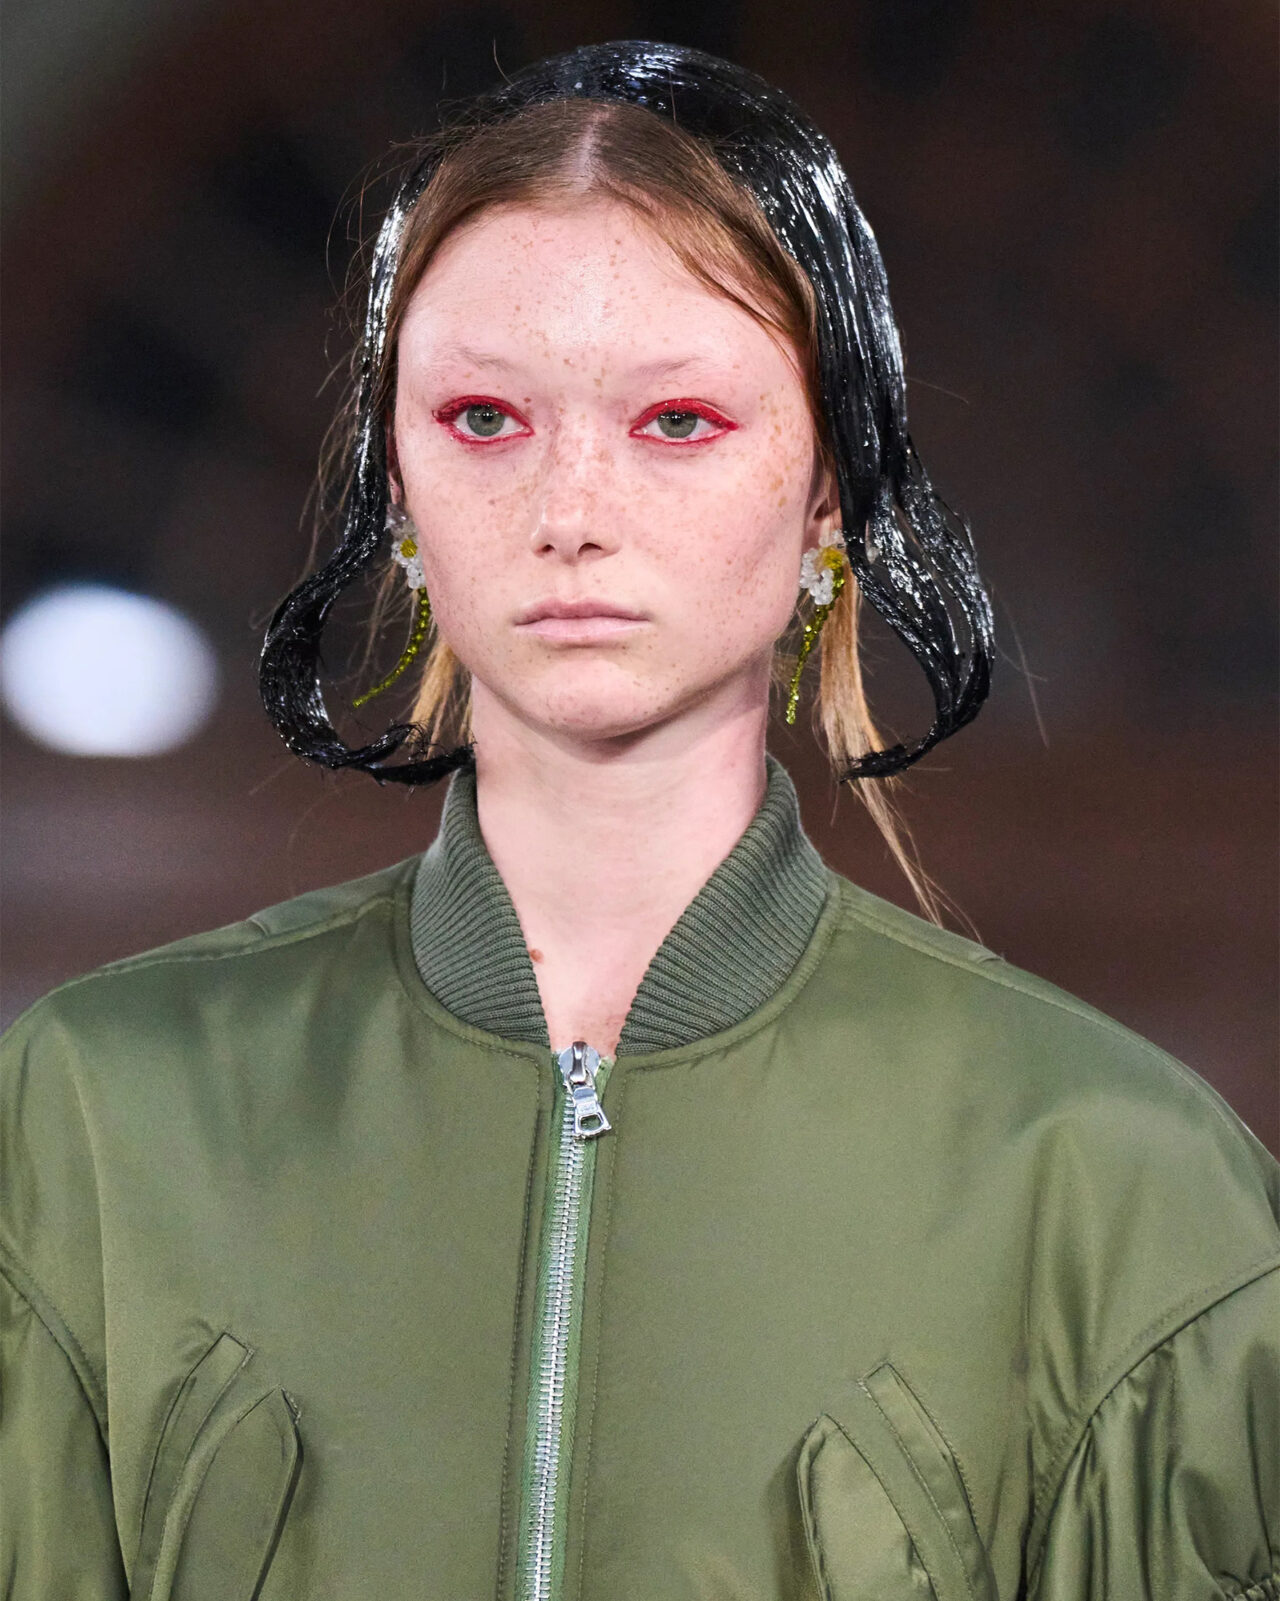 Catwalk Confidential: 4 Beauty Trends For a Fresh Spring-Summer Outlook